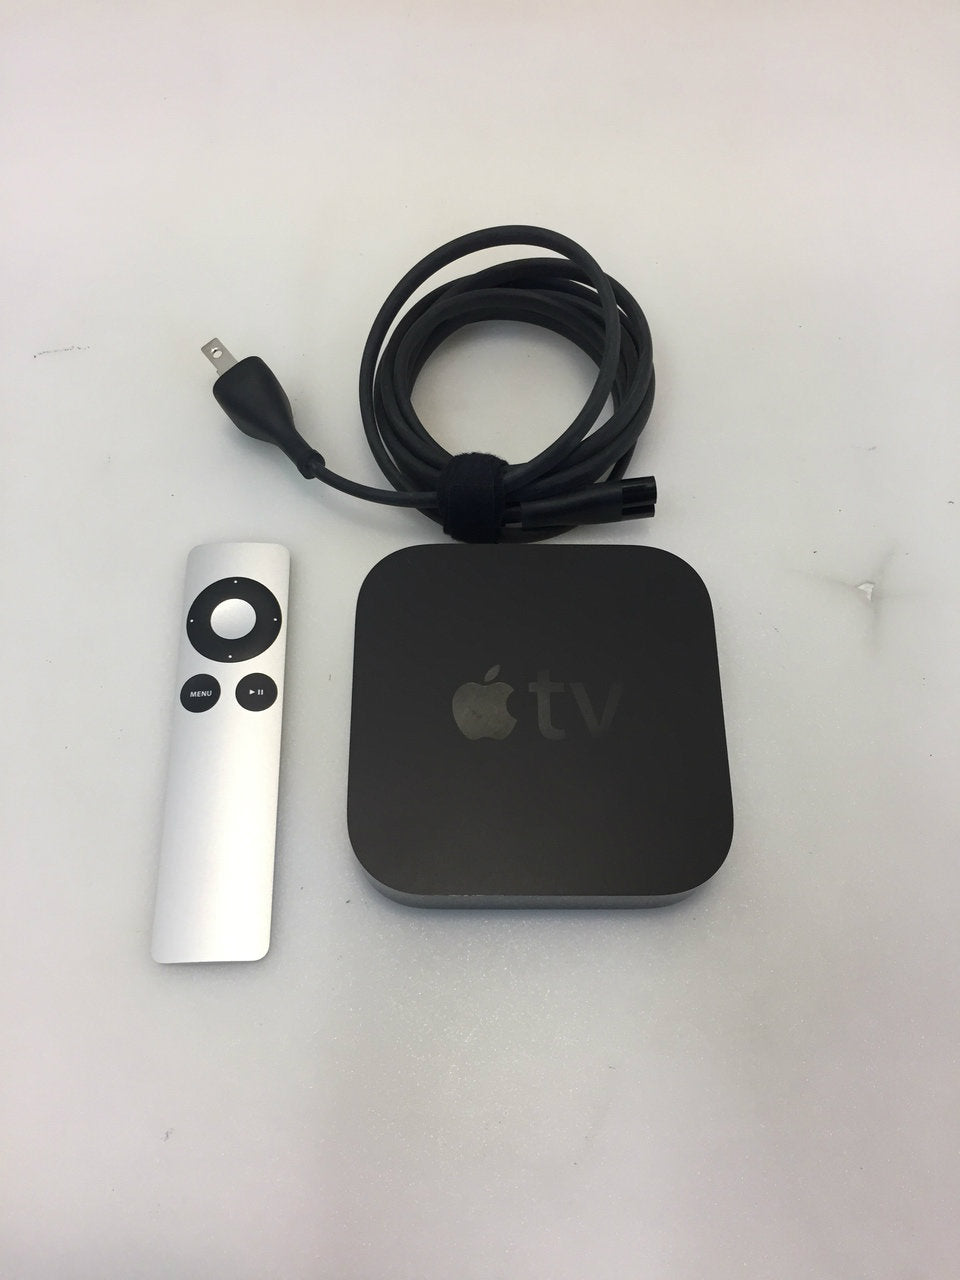 Apple TV A1469 3rd Gen MD199LL/A Smart Media Streaming Player with OEM Remote